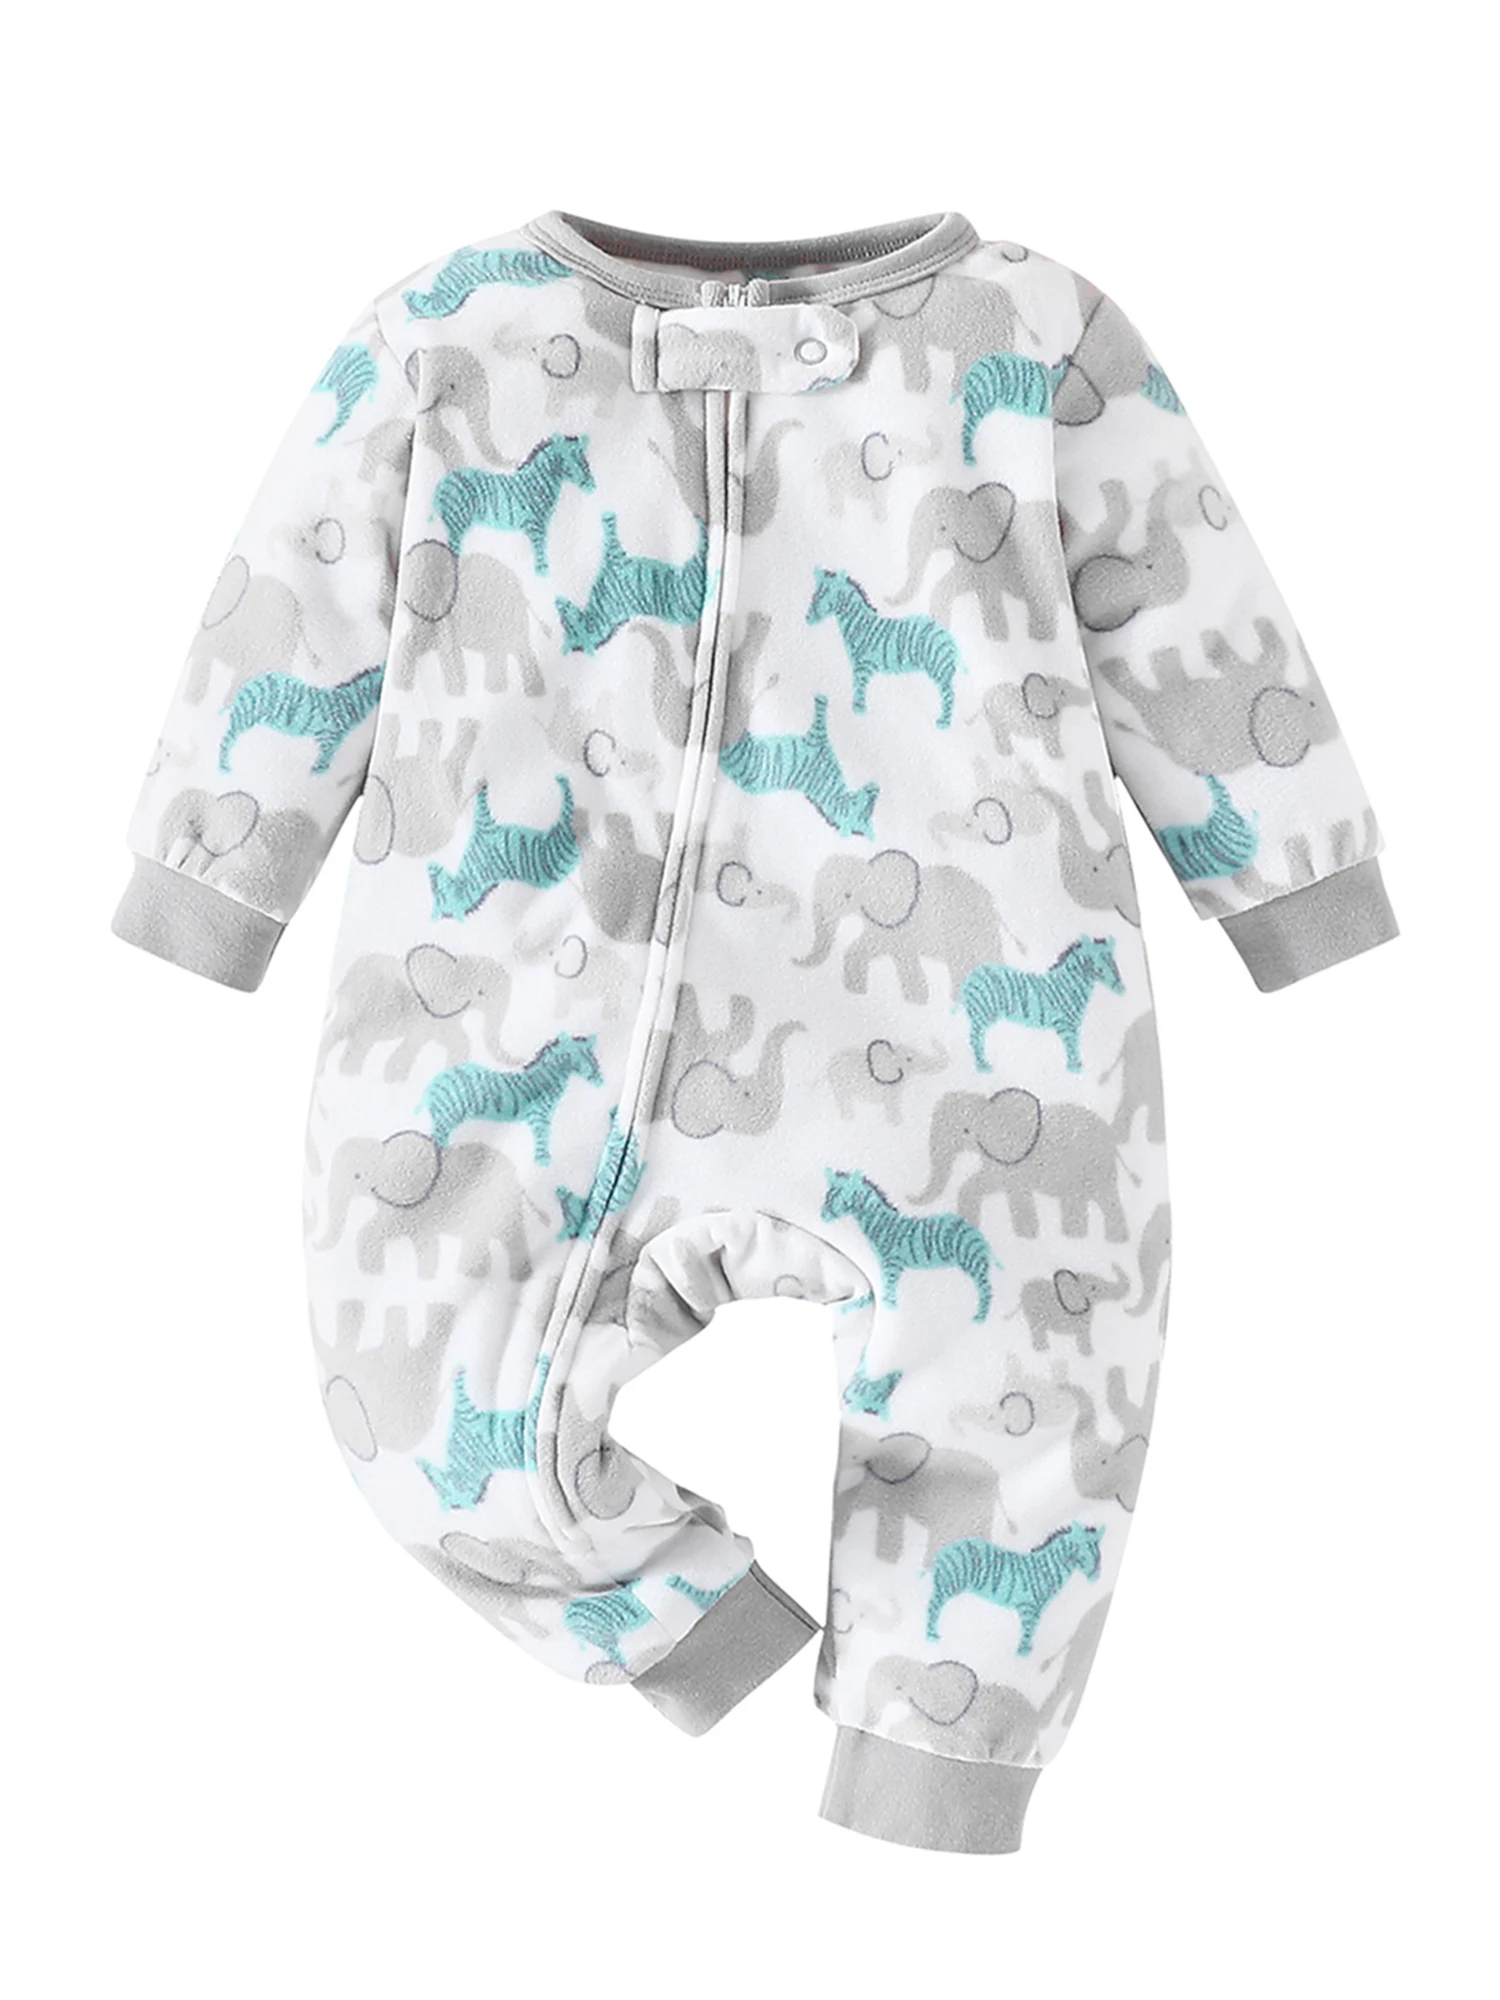 

Cute and Cozy Unisex Baby Bodysuits with Adorable Animal Prints - Perfect for Fall and Winter